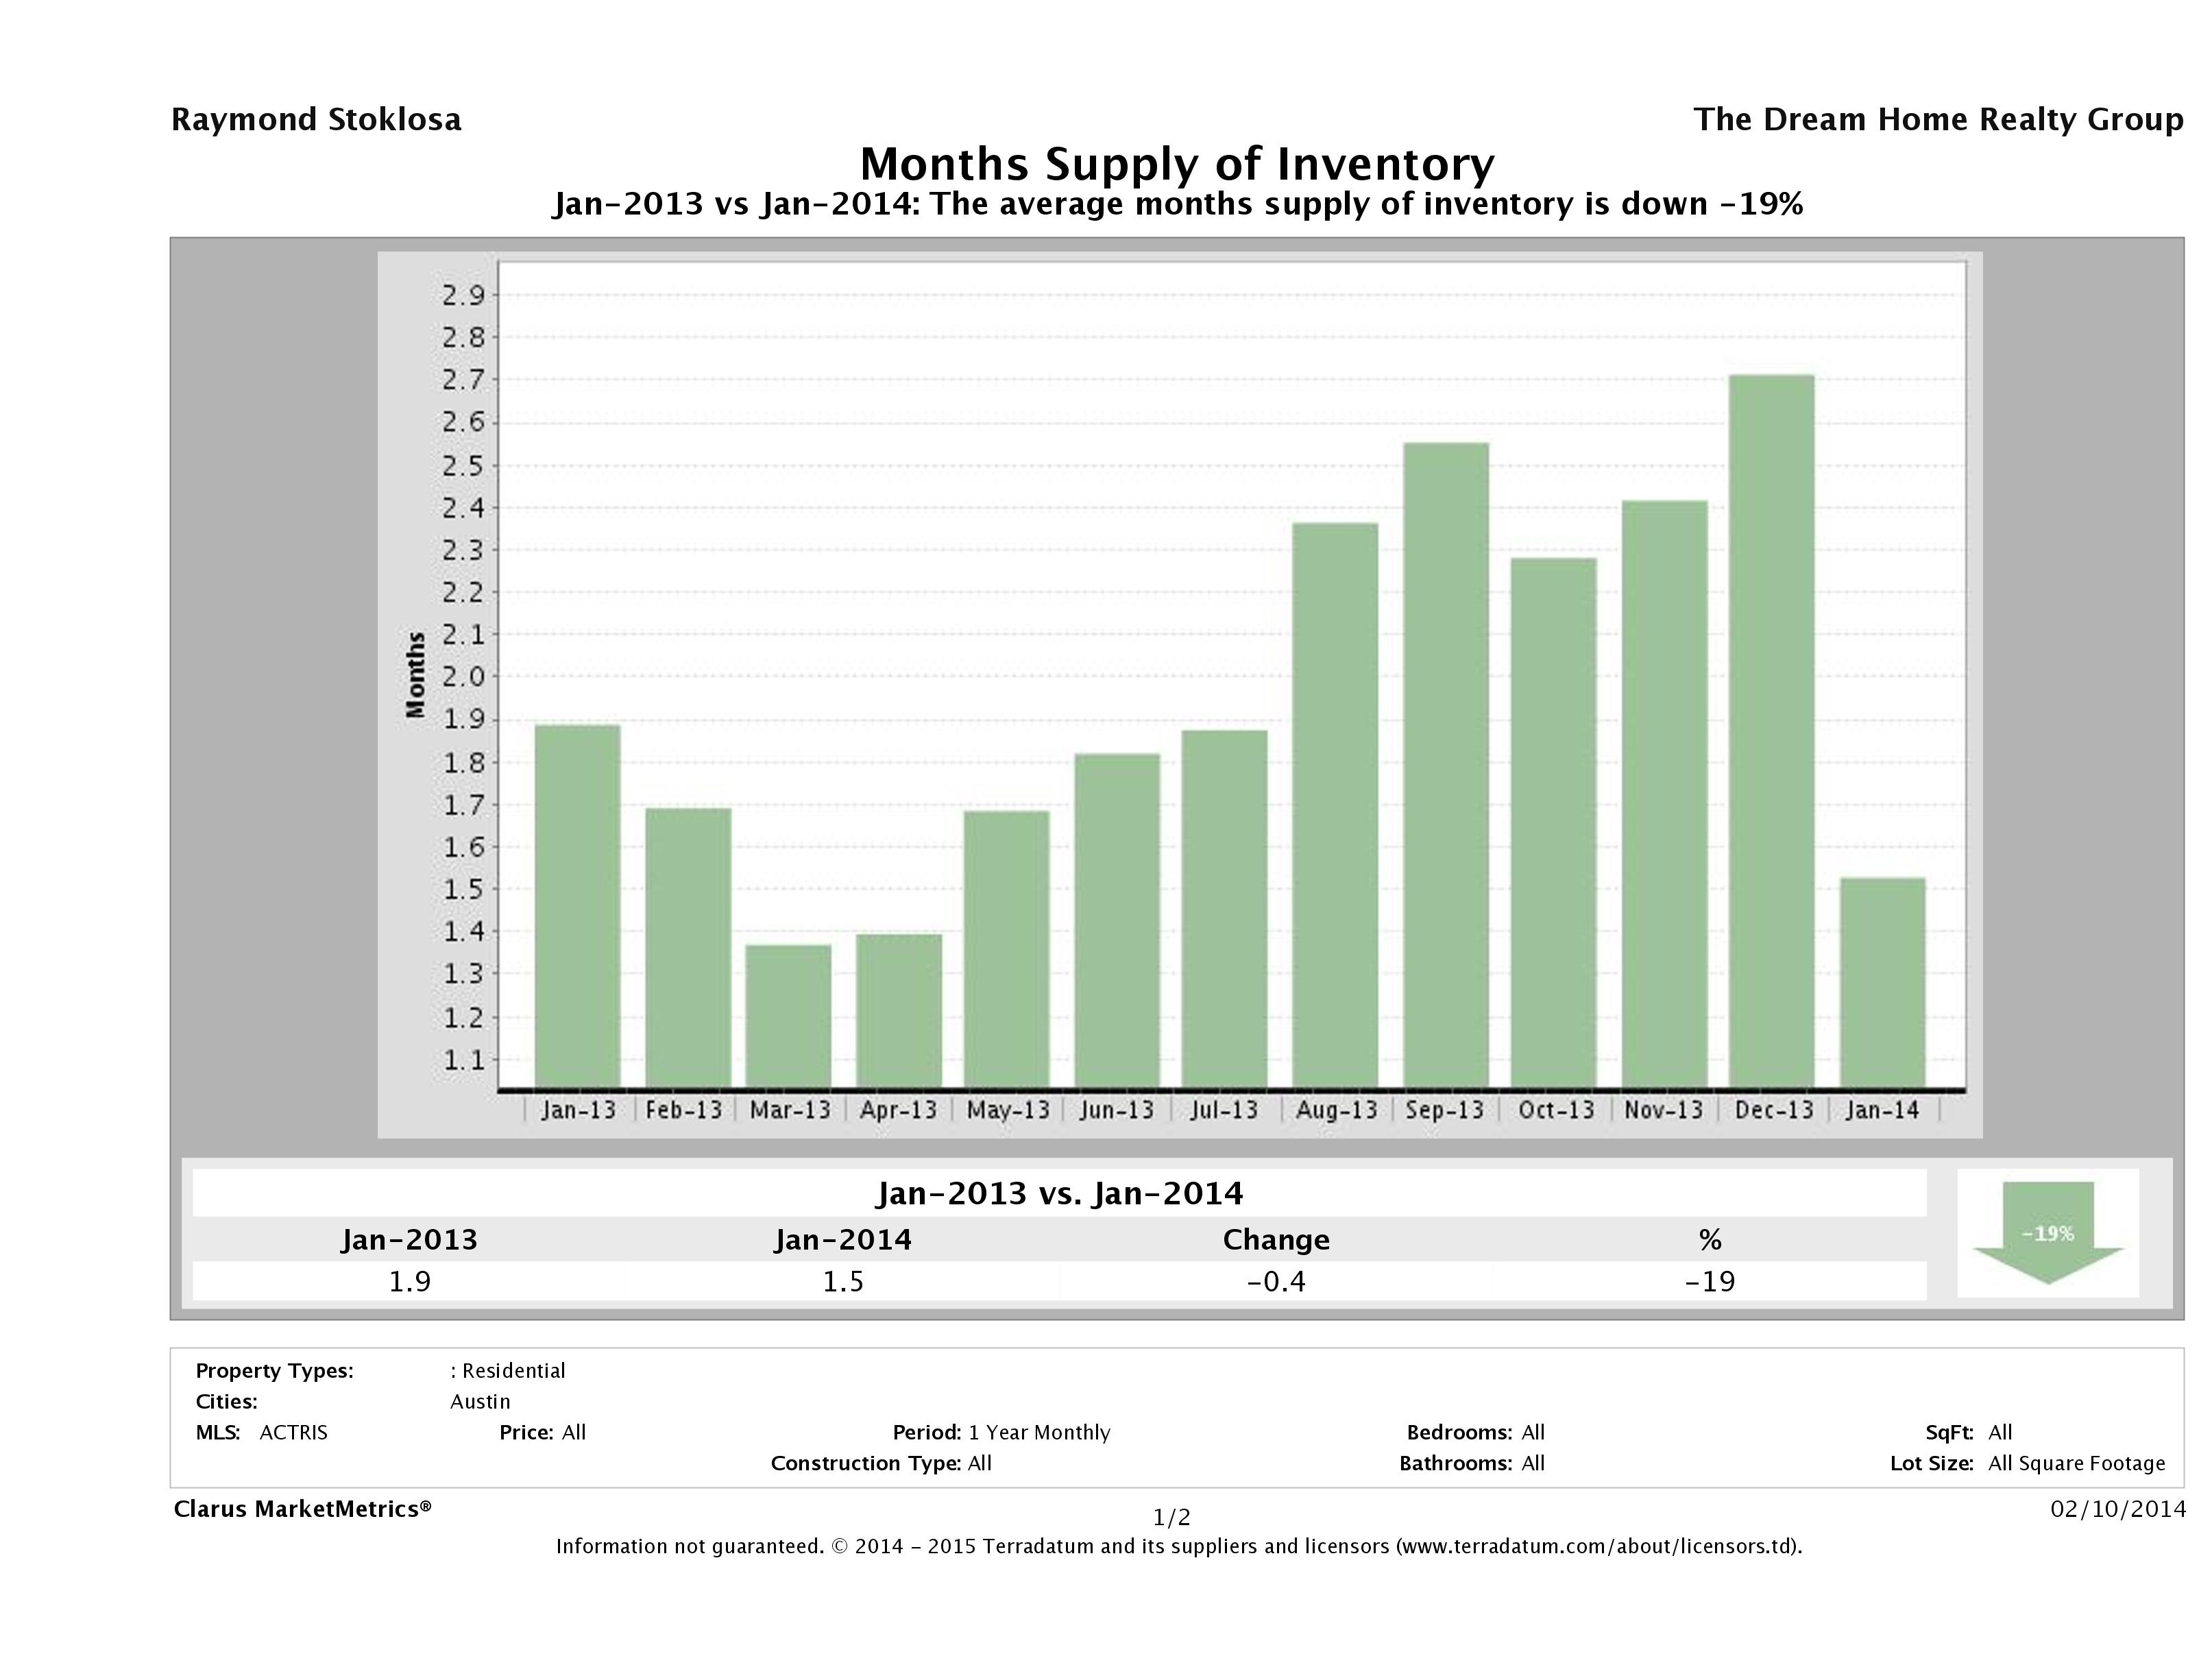 Austin single family home months inventory January 2014